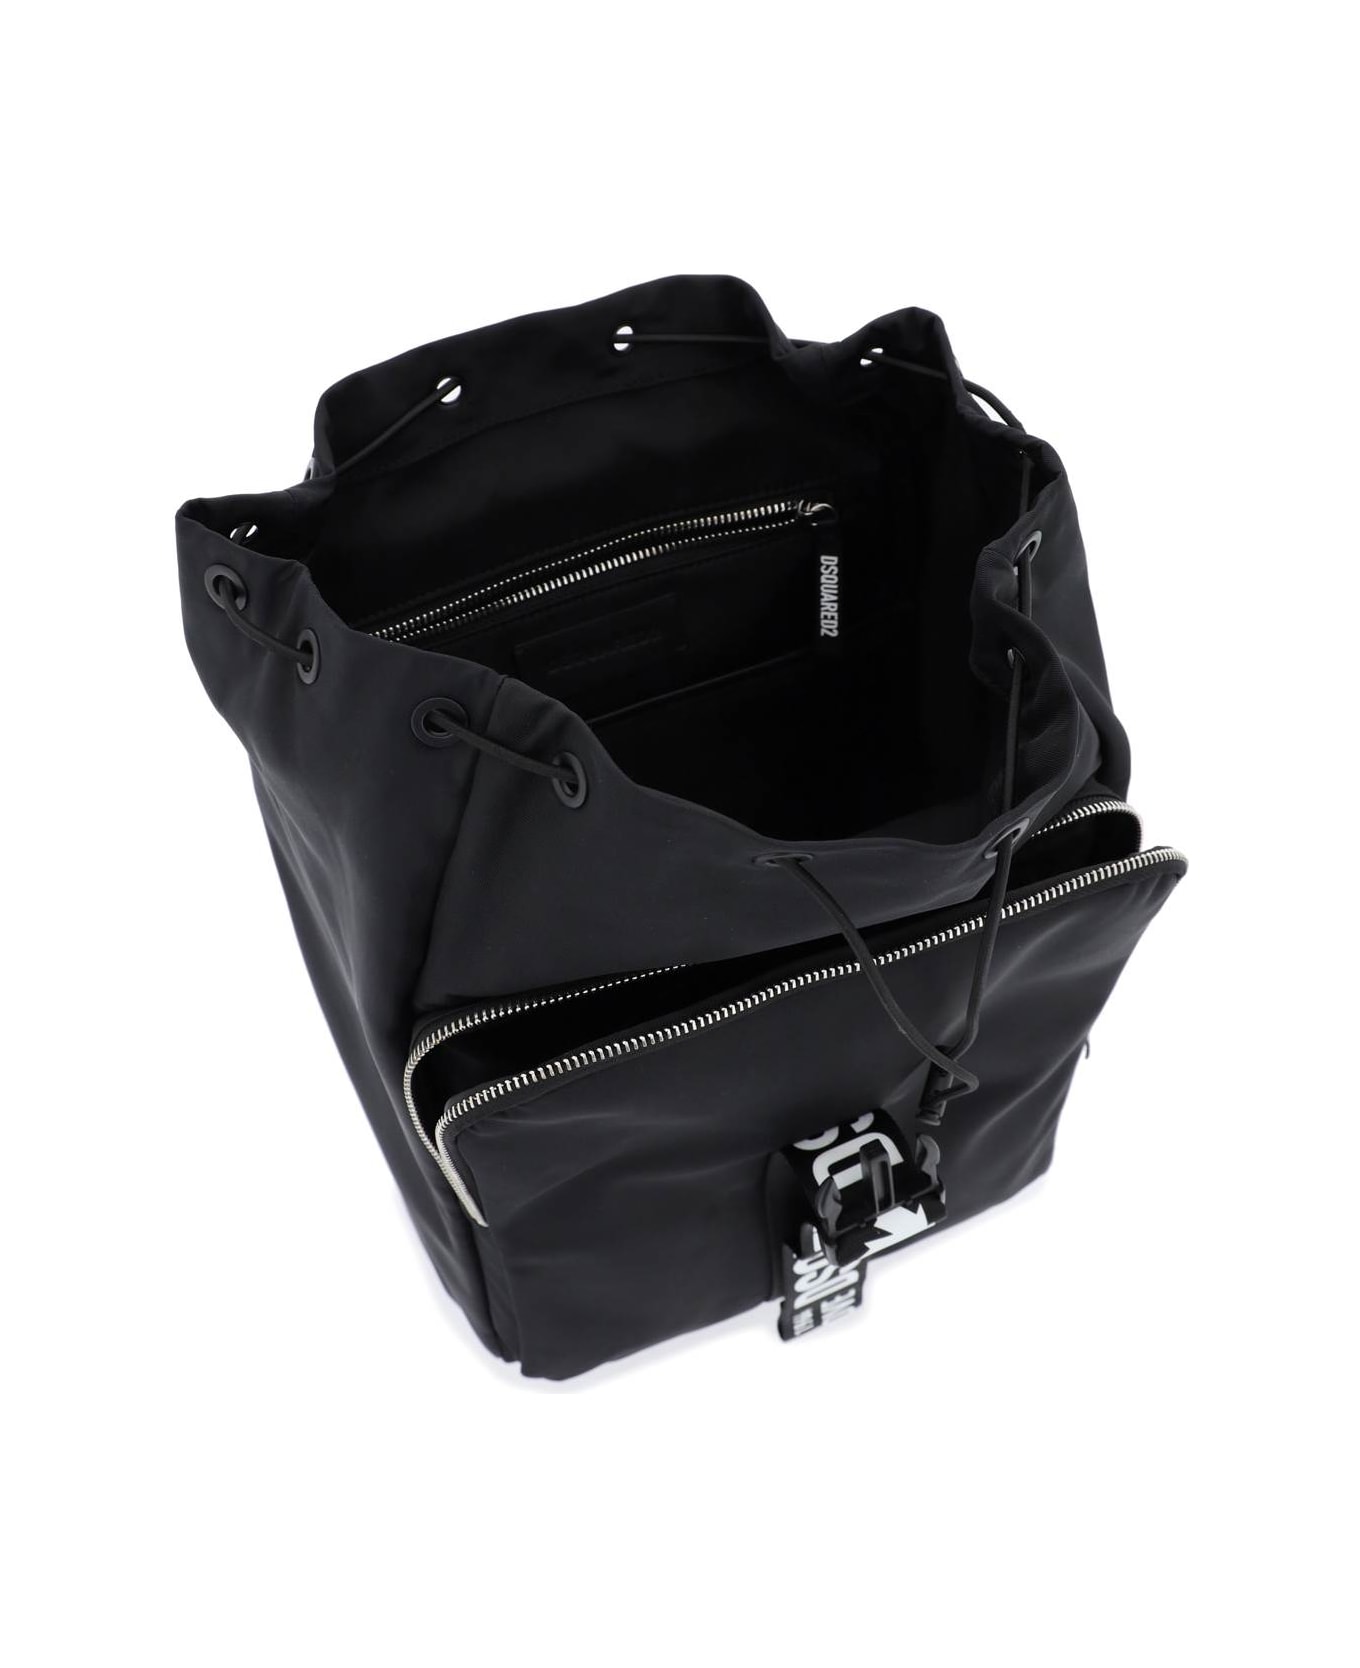 Dsquared2 Made With Love Buckled Backpack - BLACK (Black) バックパック